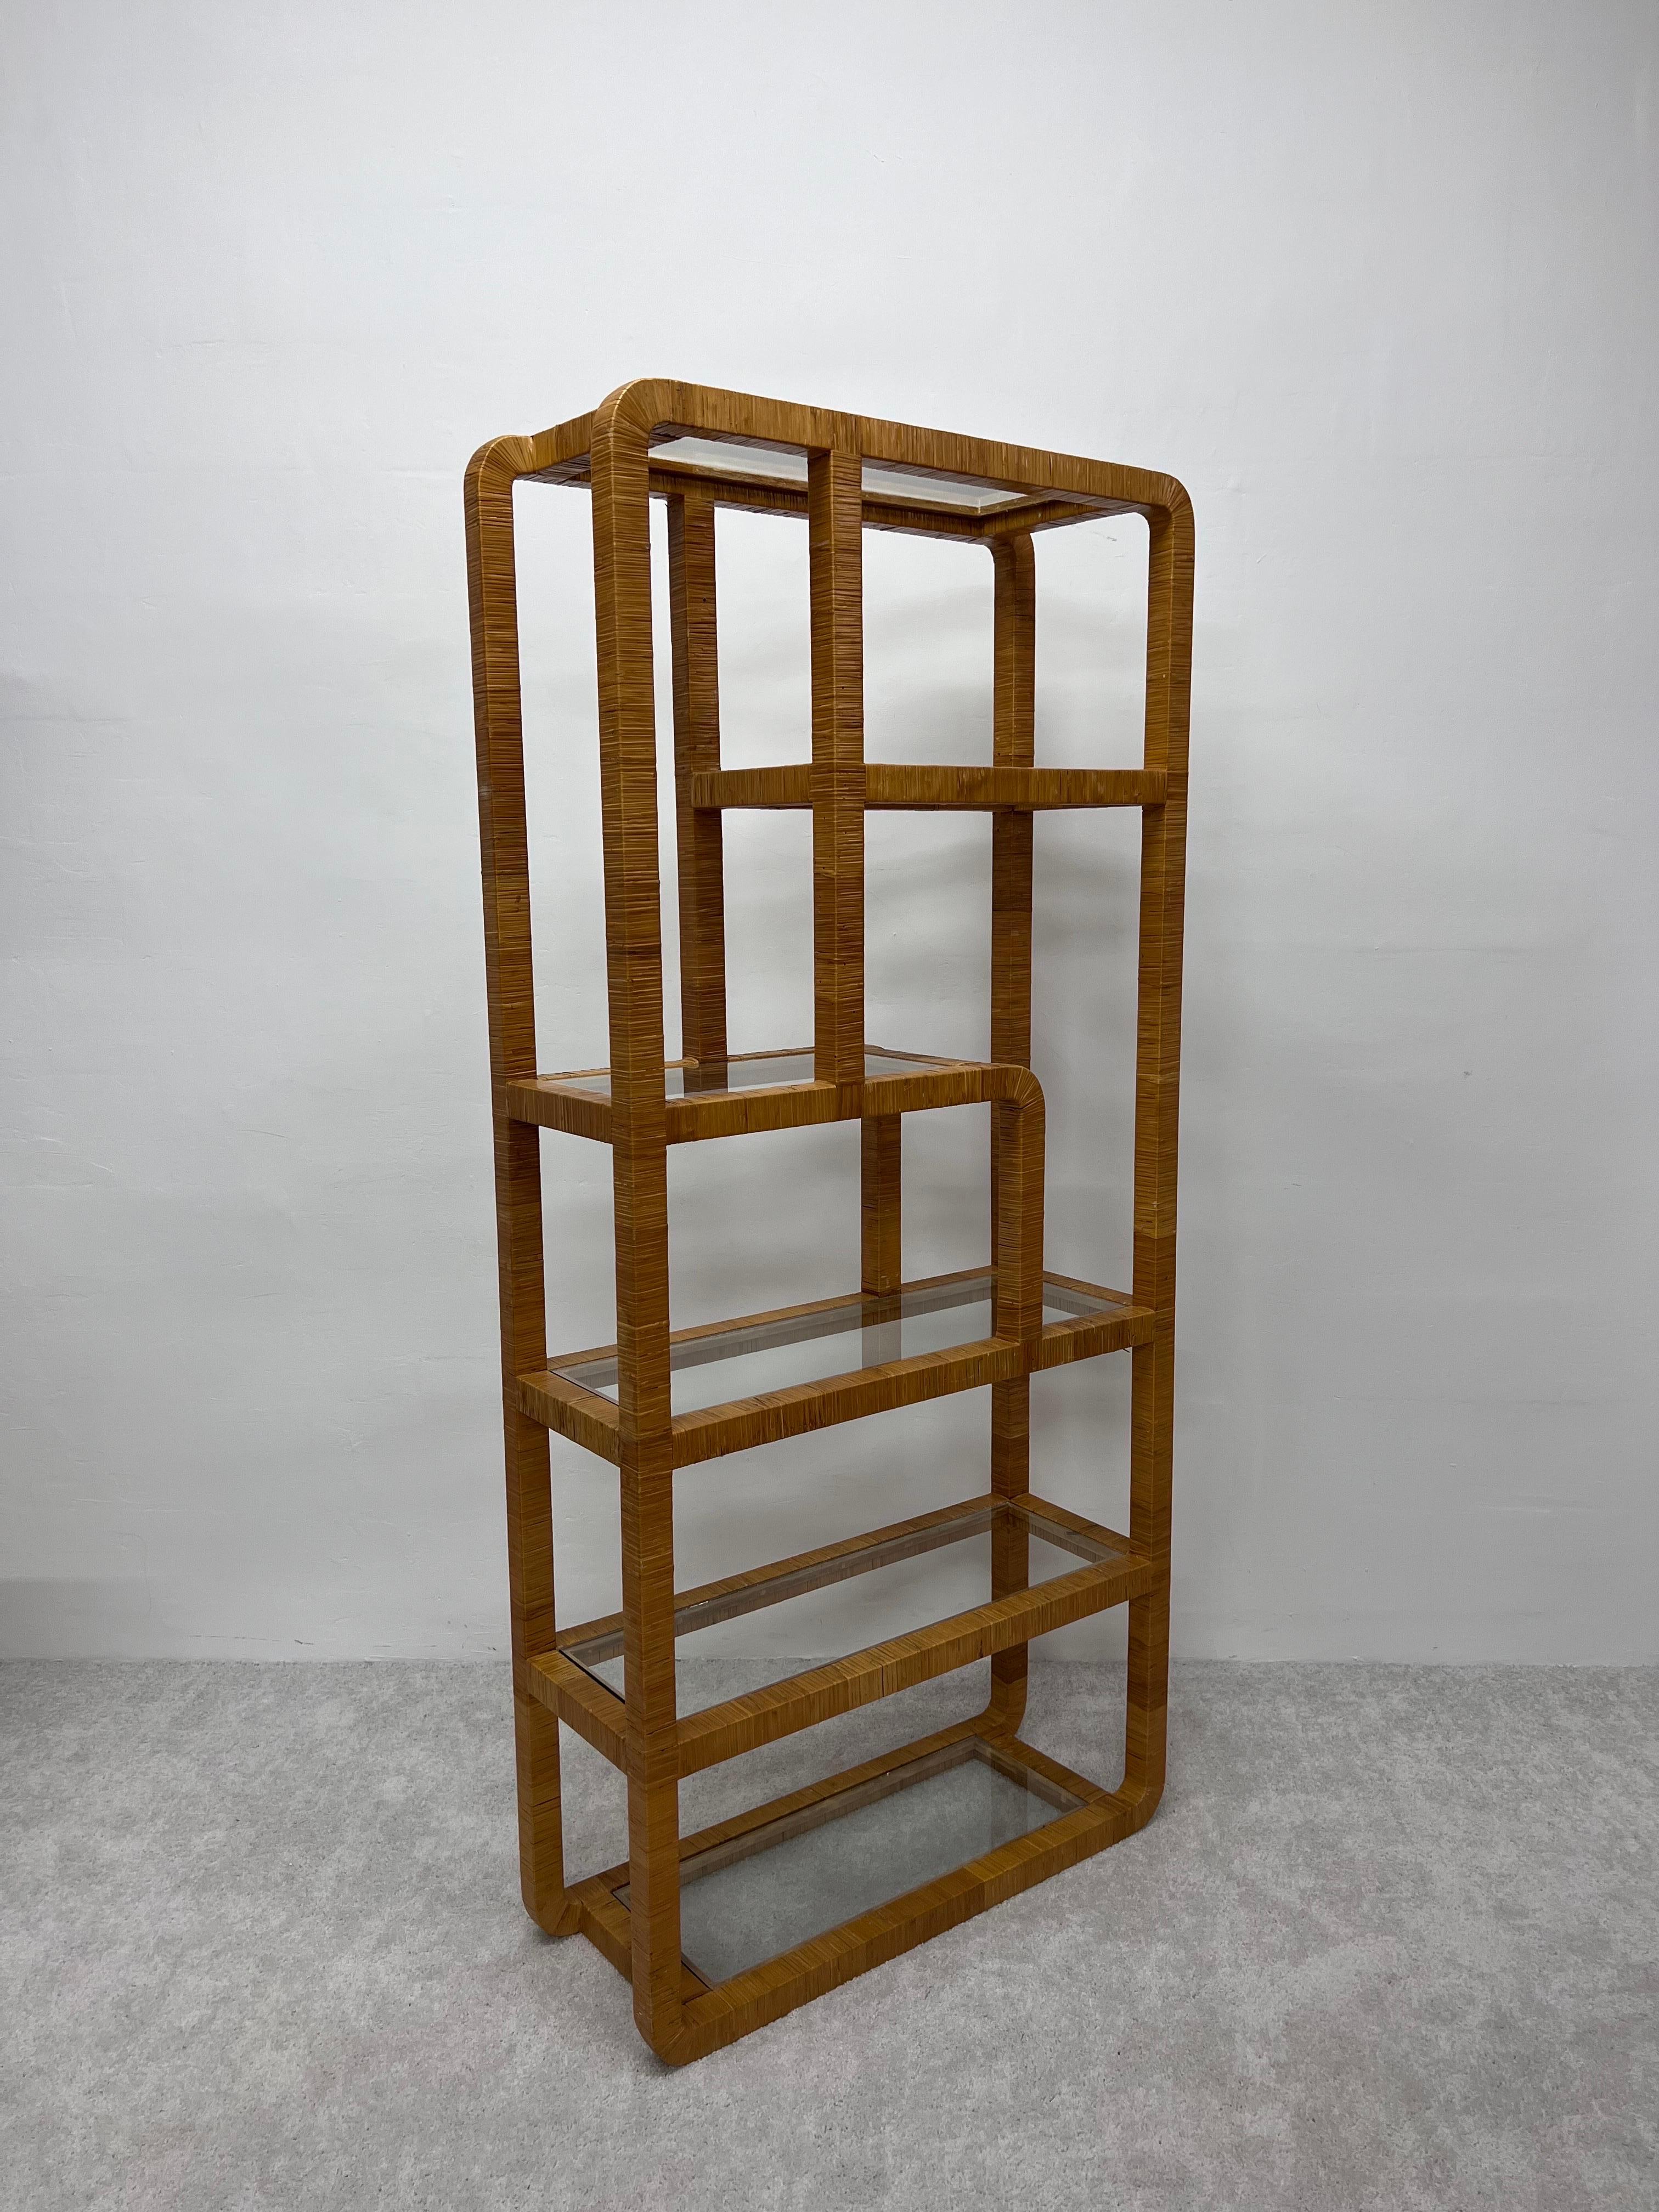 Woven rattan wrapped assymetrical etagere with glass shelves from the 1970s.